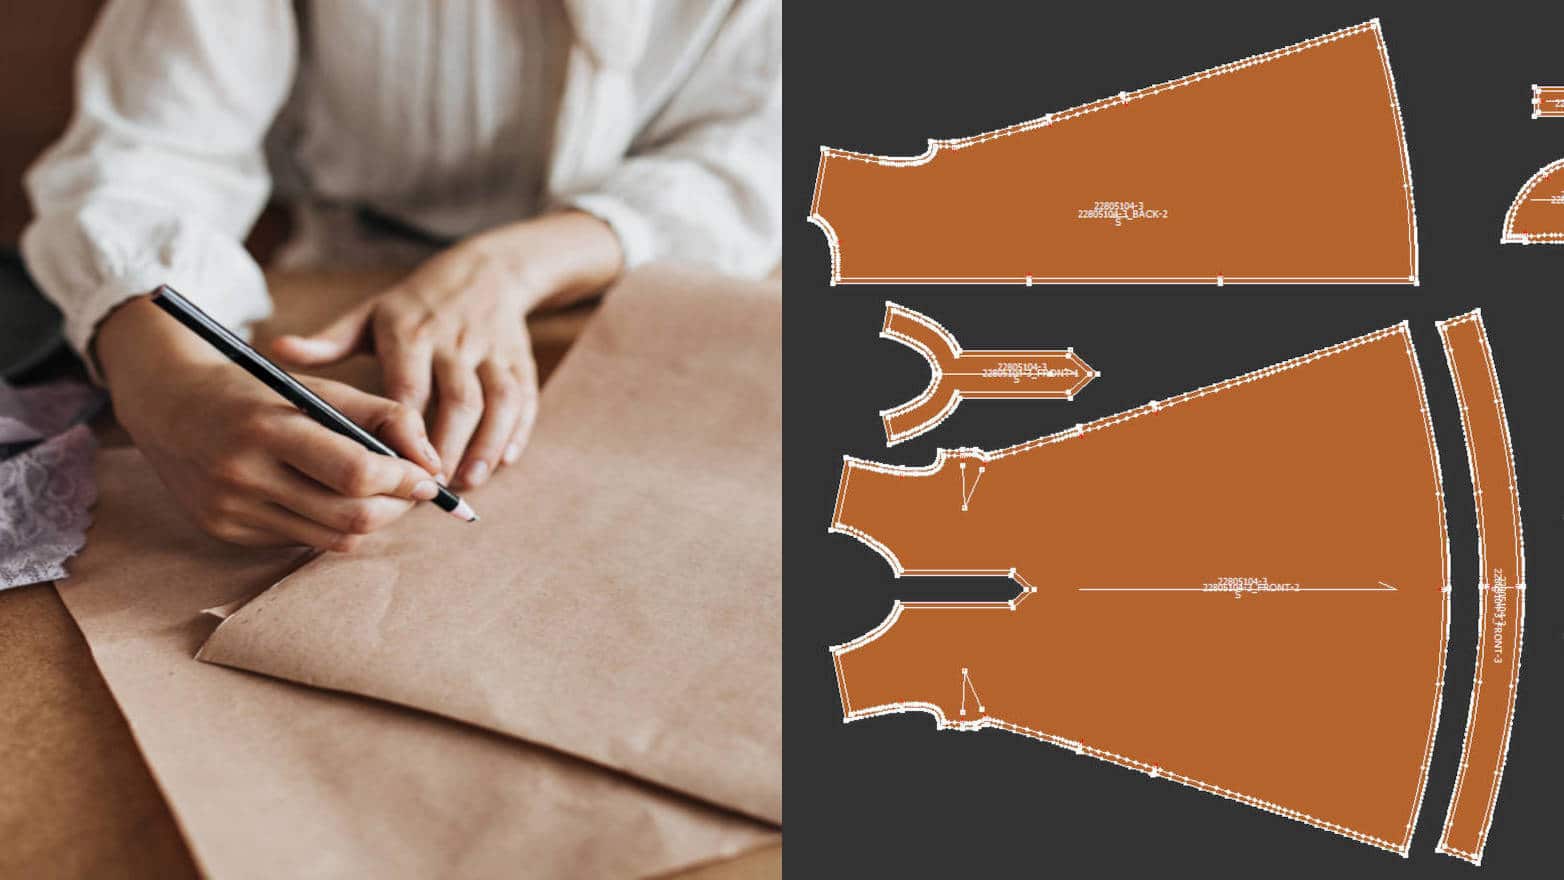 General Manual + TUKAcad CAD Combined Pattern Making Course by AD Patterns Institute